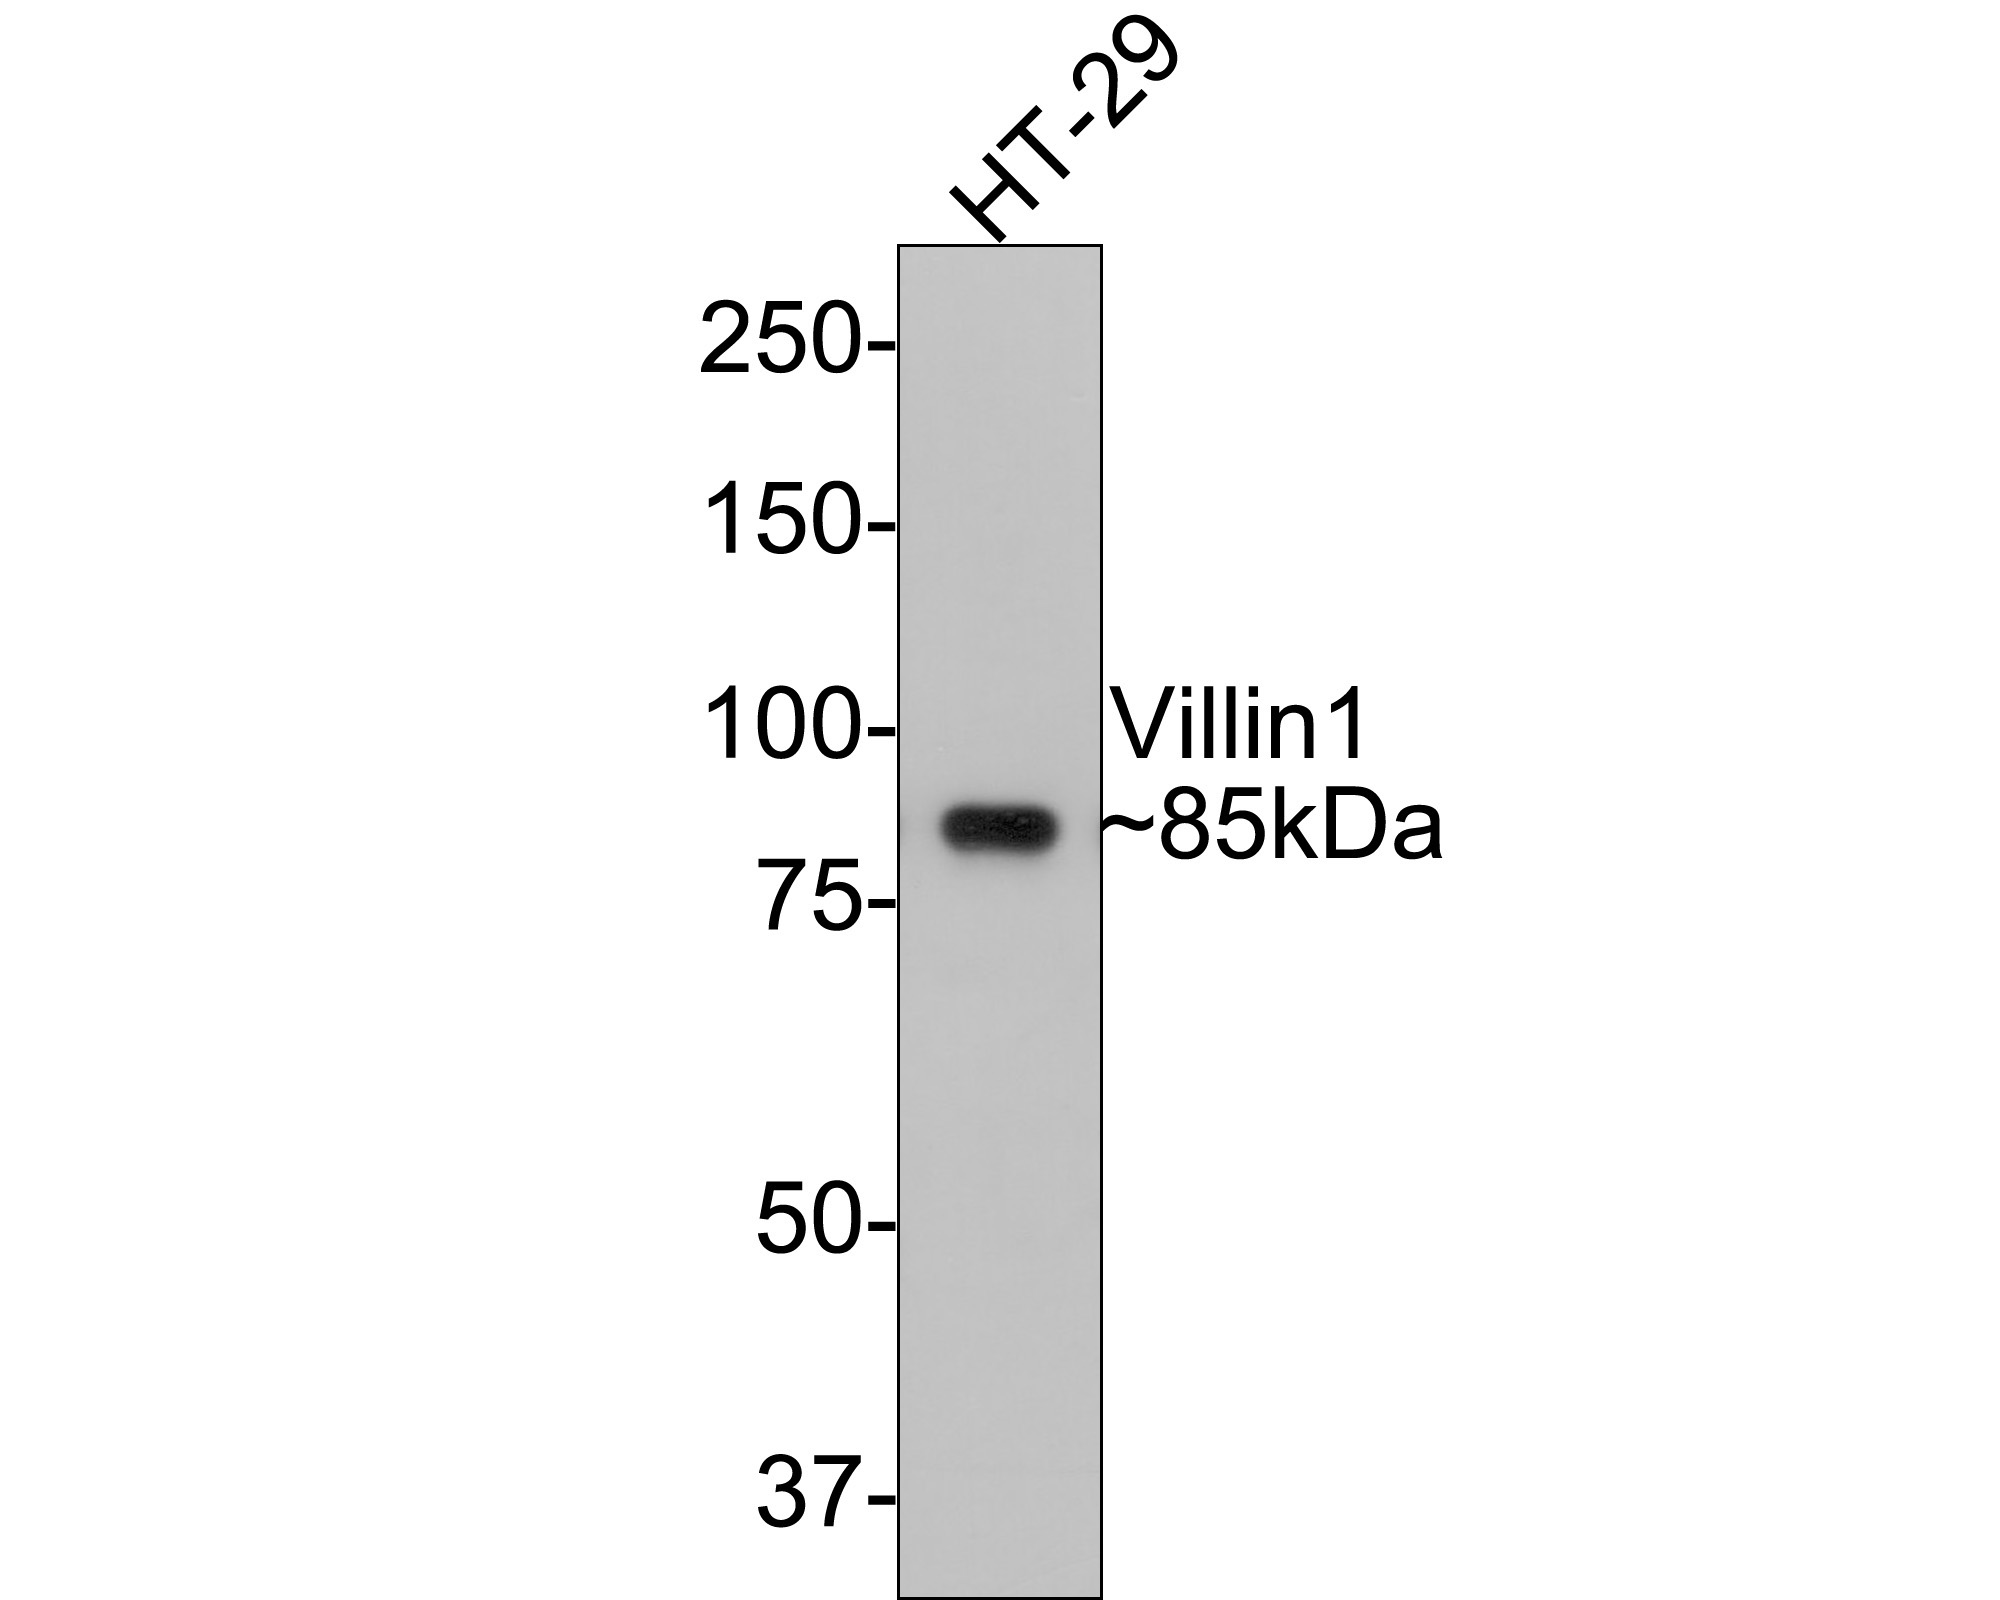 Western blot analysis of Villin1 on HT-29 cell lysates with Rabbit anti-Villin1 antibody (HA721134) at 1/2,000 dilution.<br />
<br />
Lysates/proteins at 10 µg/Lane.<br />
<br />
Predicted band size: 93 kDa<br />
Observed band size: 85 kDa<br />
<br />
Exposure time: 15 seconds;<br />
<br />
8% SDS-PAGE gel.<br />
<br />
Proteins were transferred to a PVDF membrane and blocked with 5% NFDM/TBST for 1 hour at room temperature. The primary antibody (HA721134) at 1/2,000 dilution was used in 5% NFDM/TBST at room temperature for 2 hours. Goat Anti-Rabbit IgG - HRP Secondary Antibody (HA1001) at 1:300,000 dilution was used for 1 hour at room temperature.